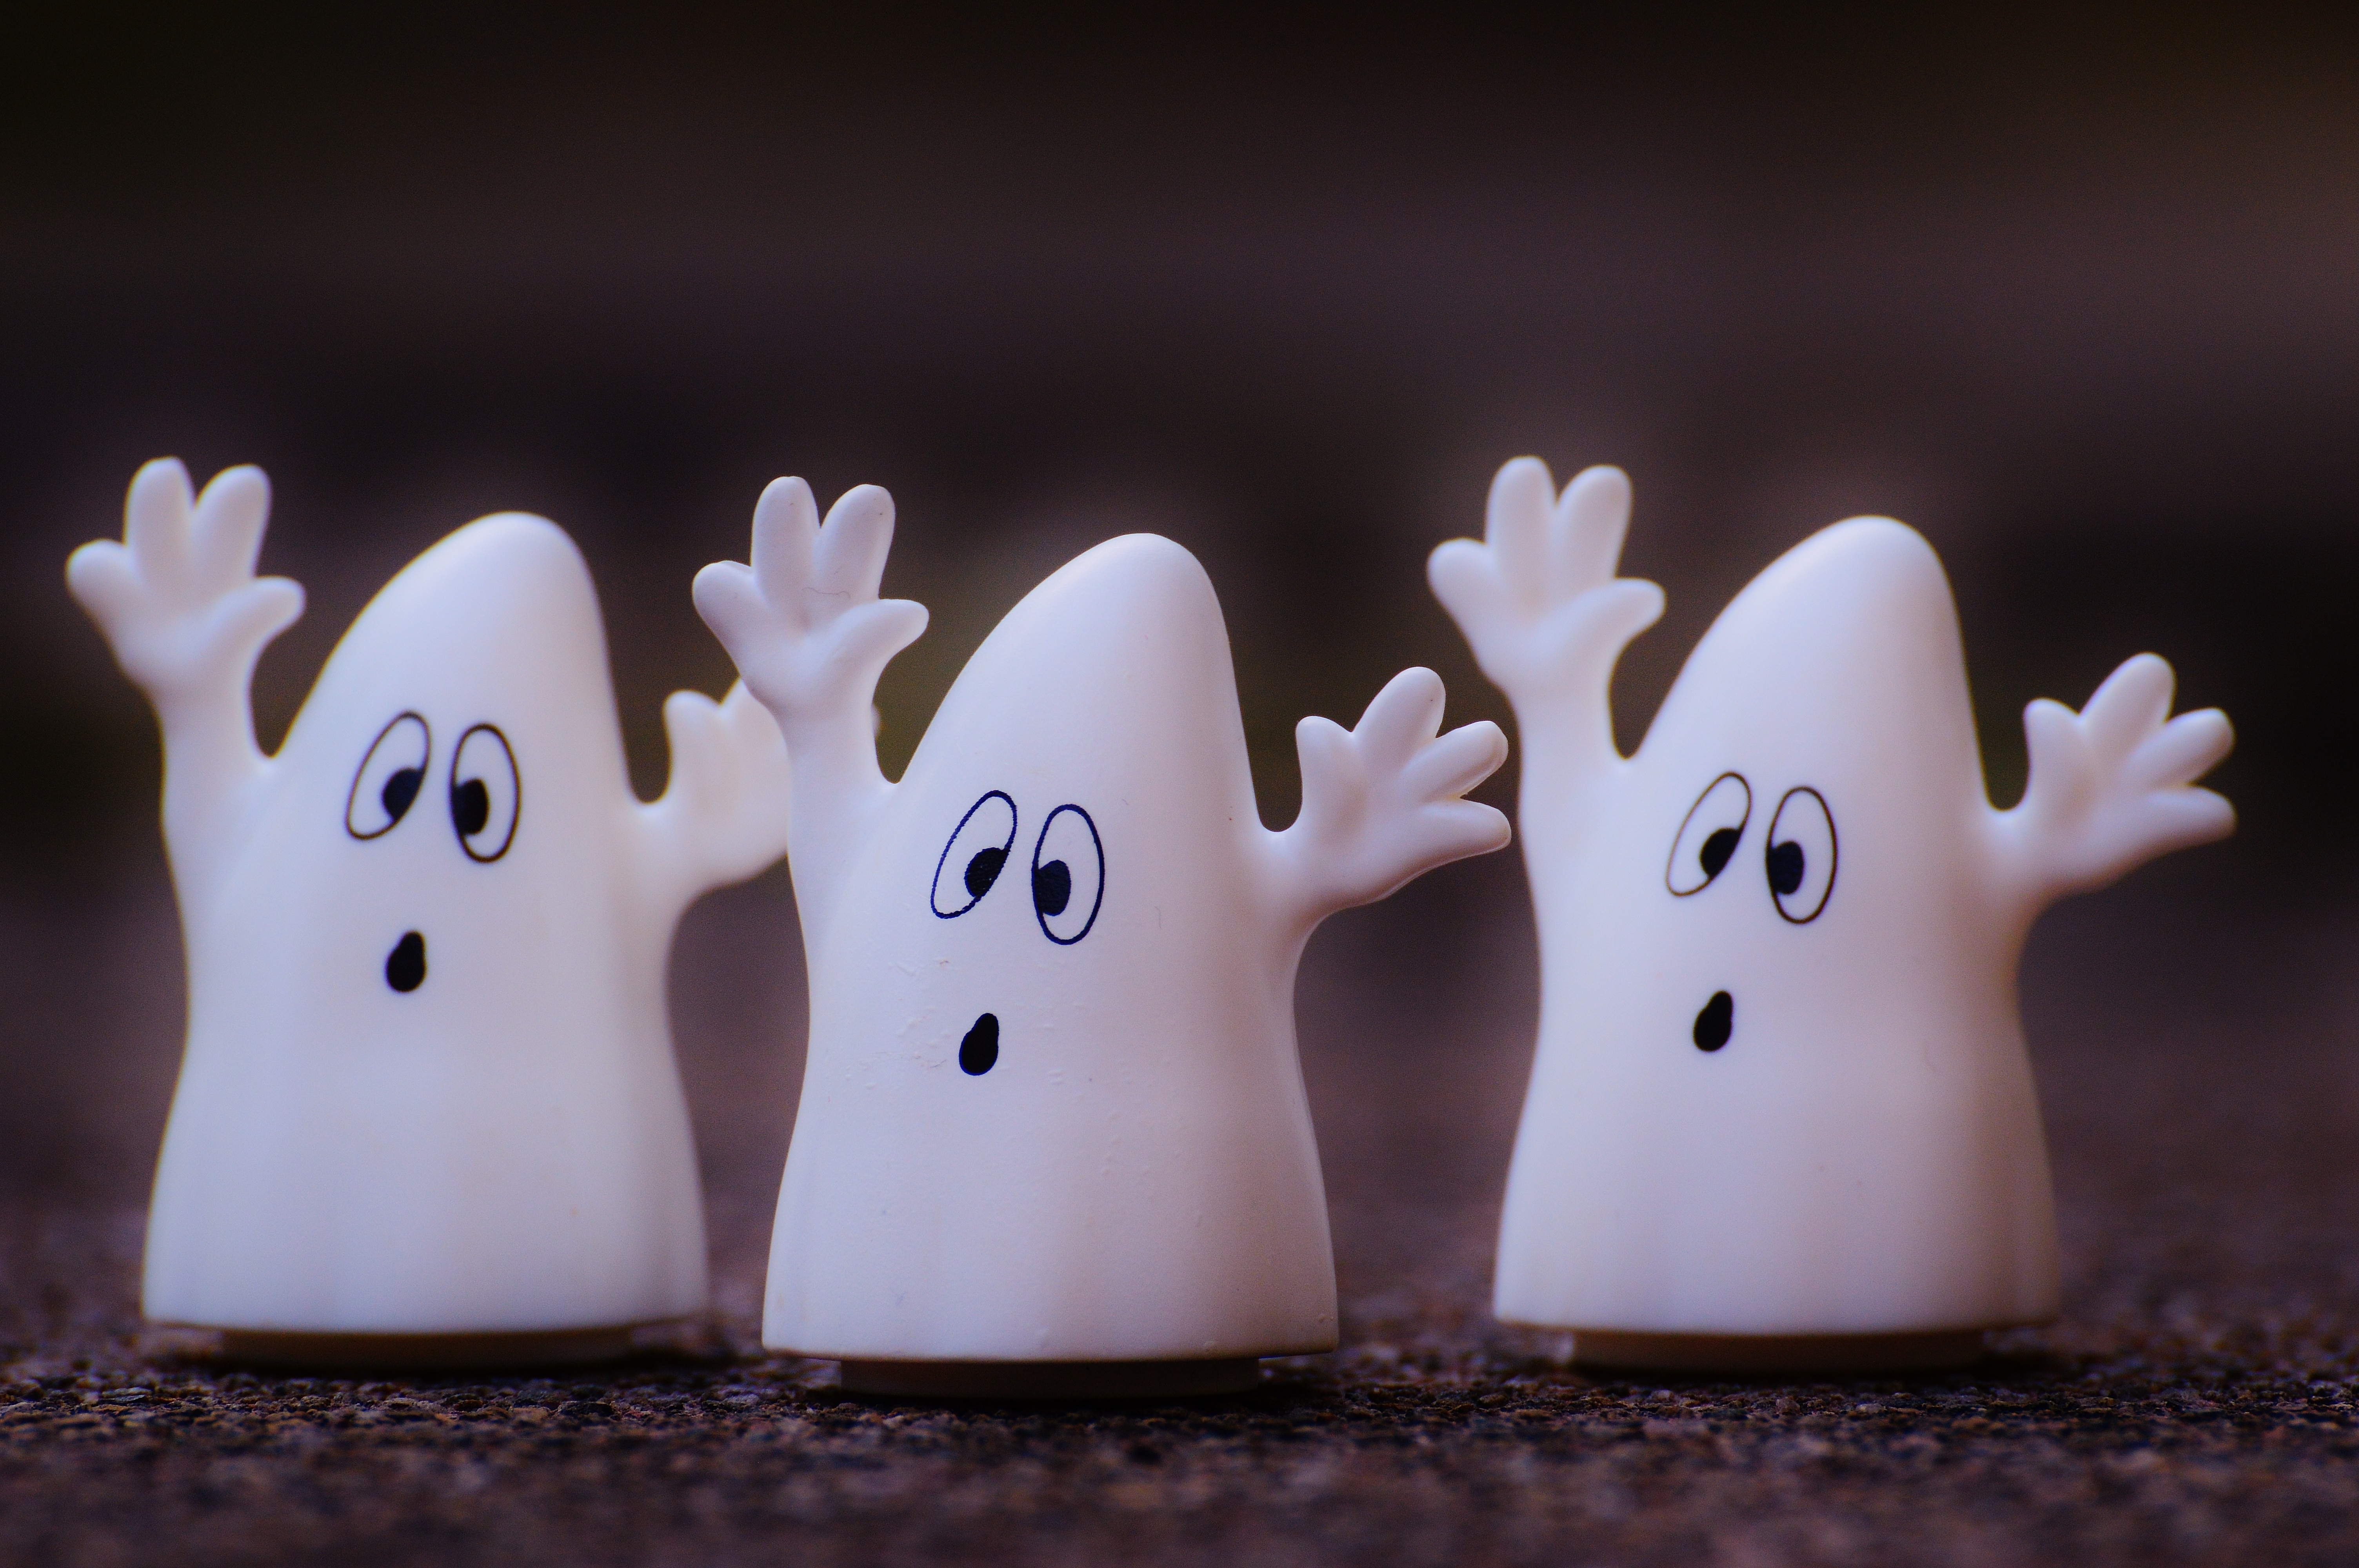 Toys, Ghost, Ghosts, Funny, Plastic, salt shaker, no people